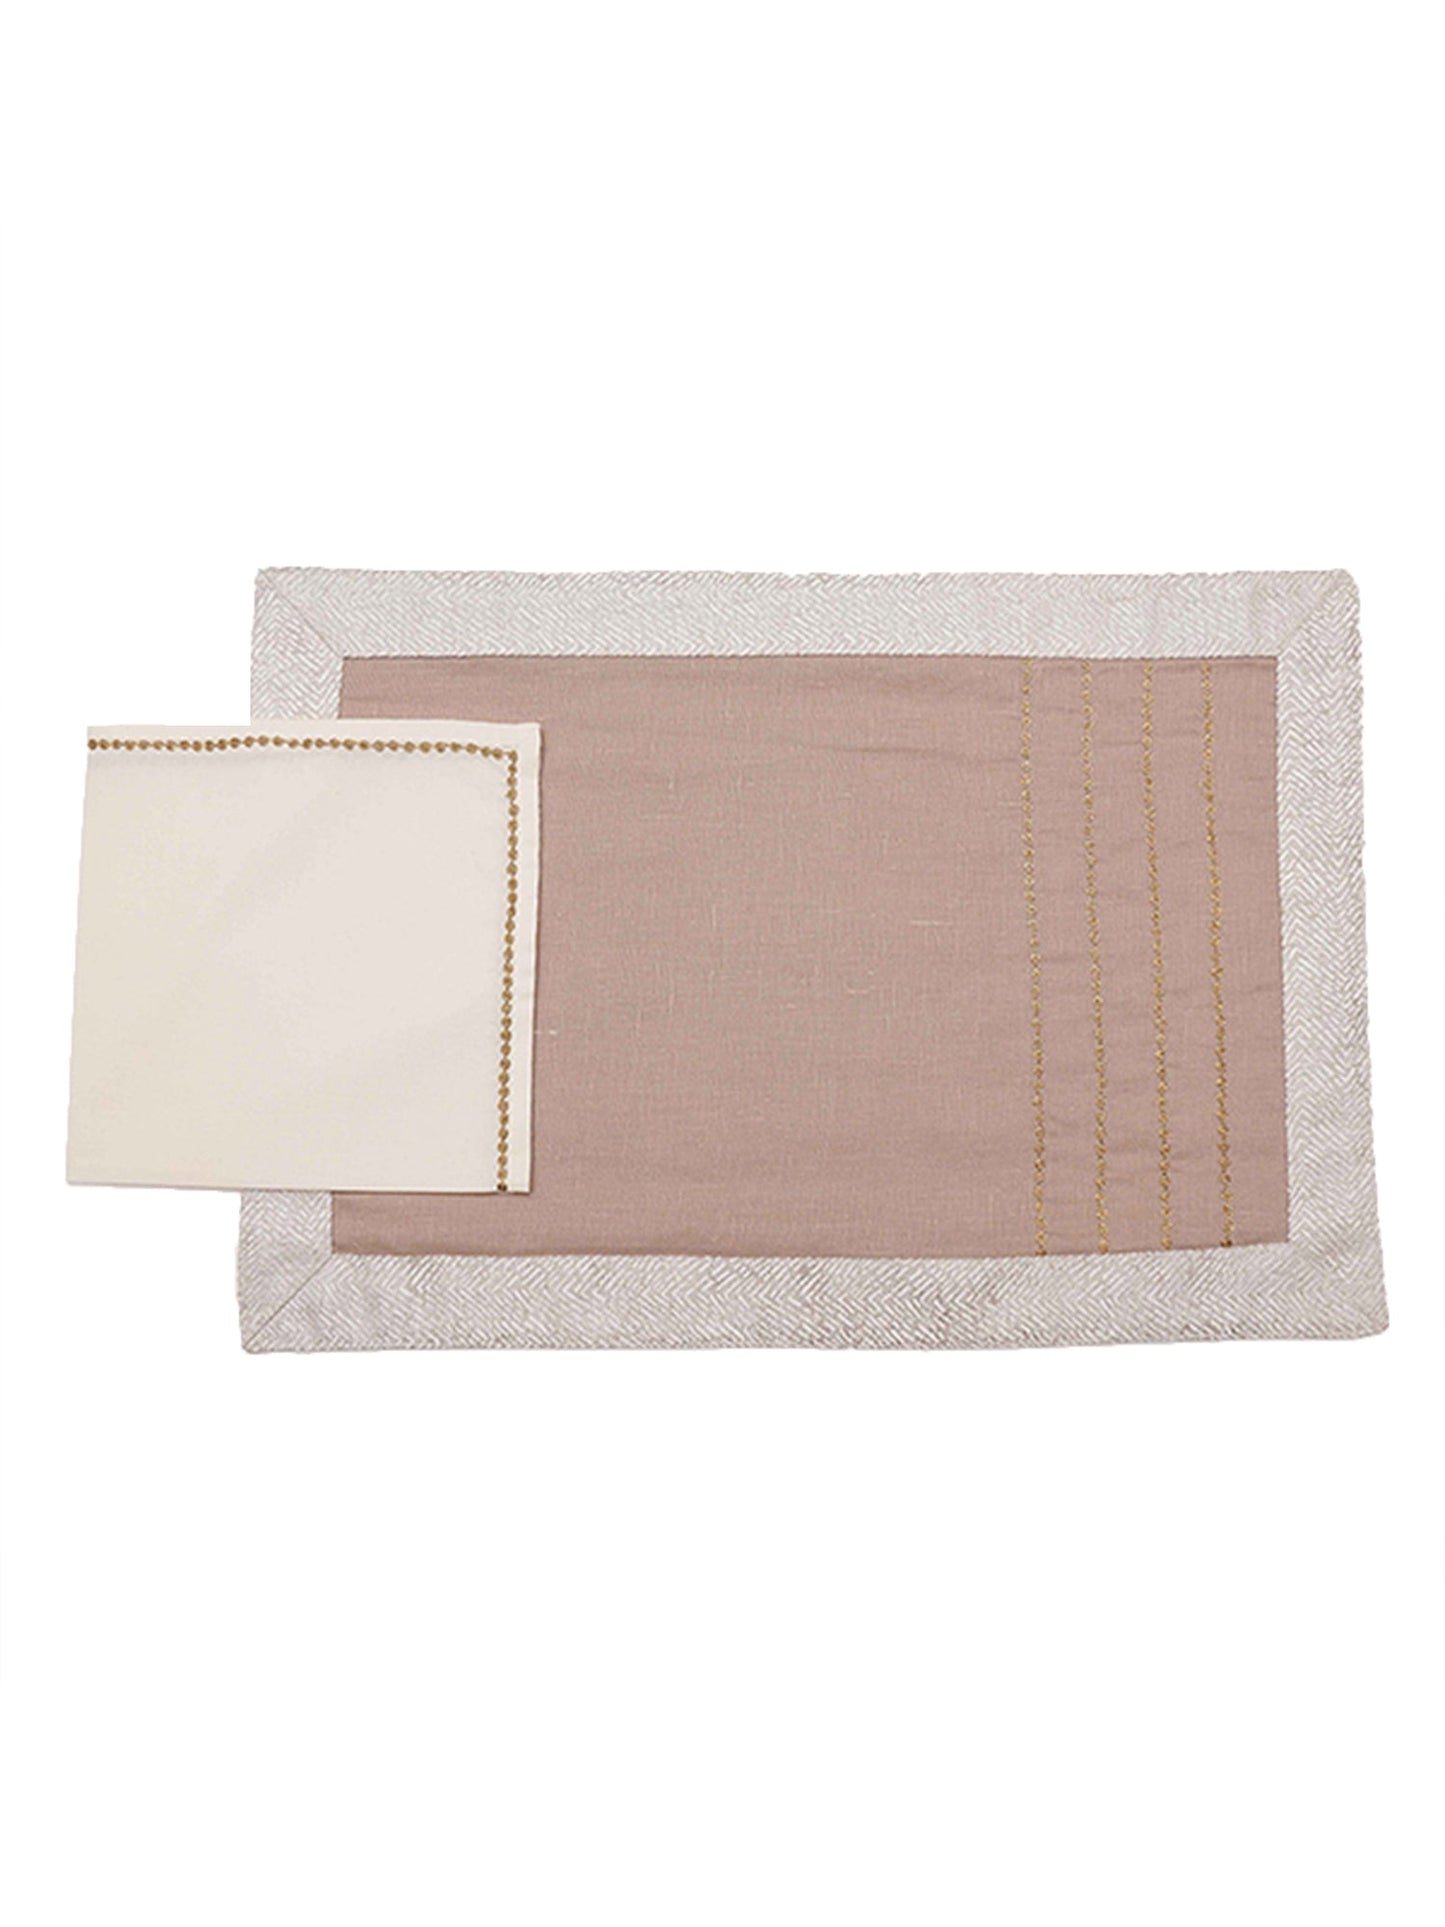 4 lines of golden embroidery on beige placemats with border and cotton napkins - 13x19 inch